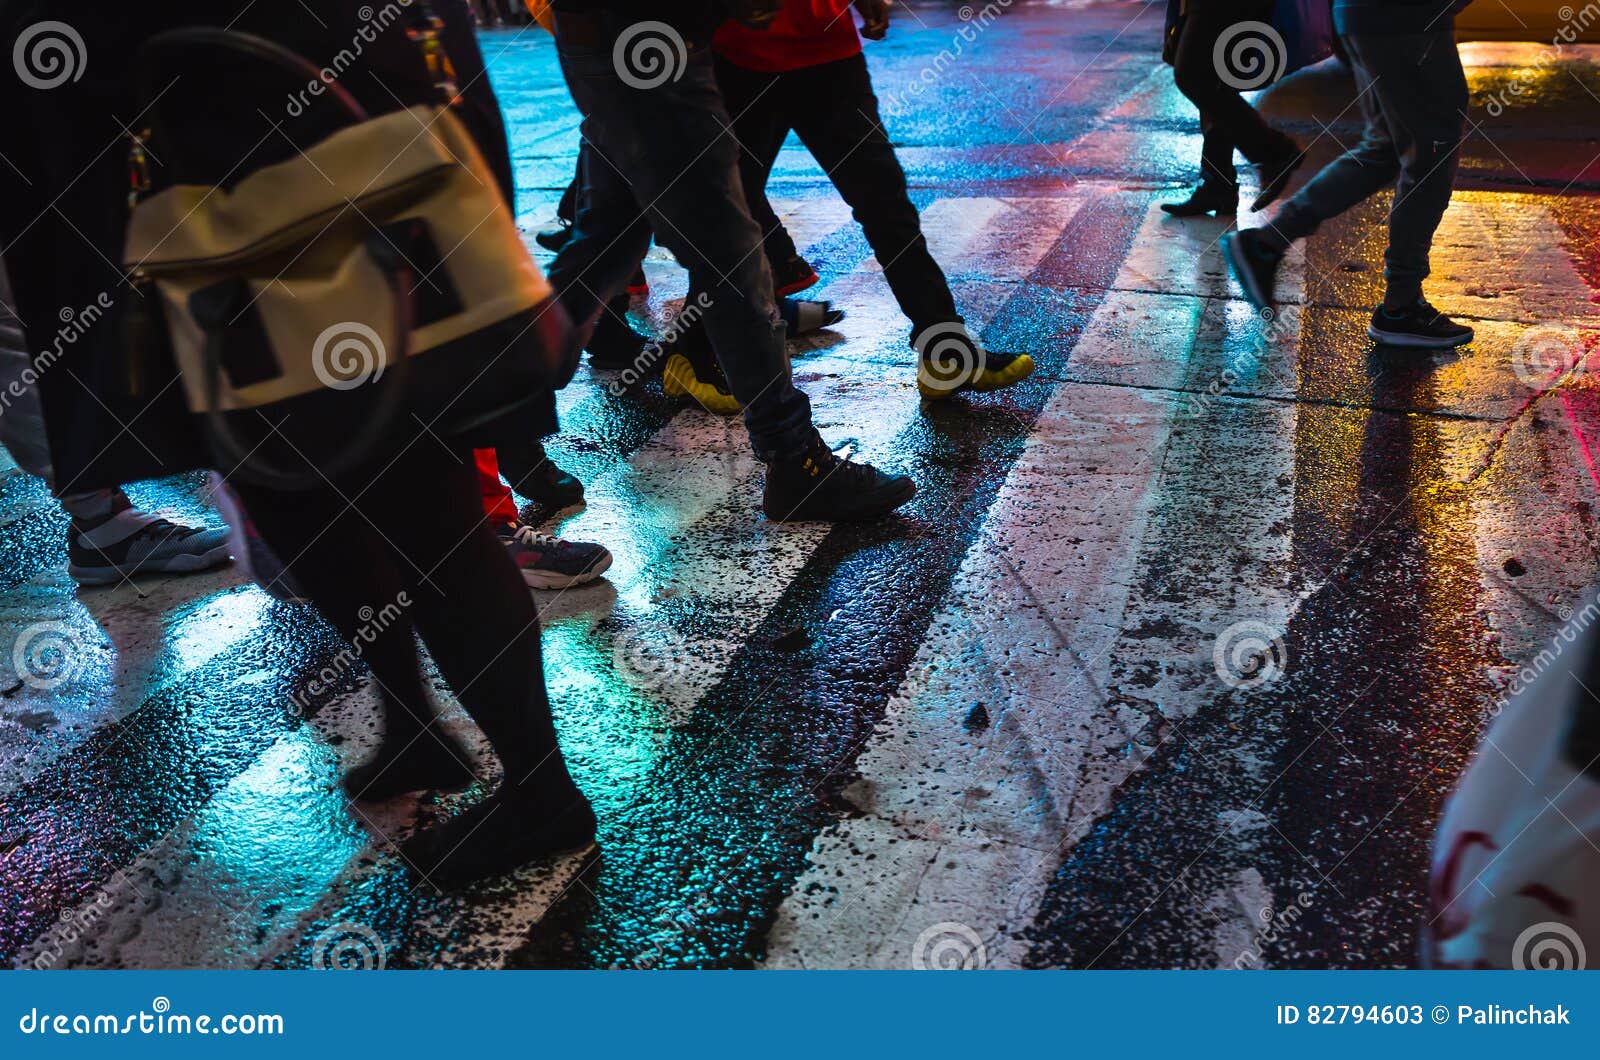 abstract blurred image of nyc streets after rain with reflectio